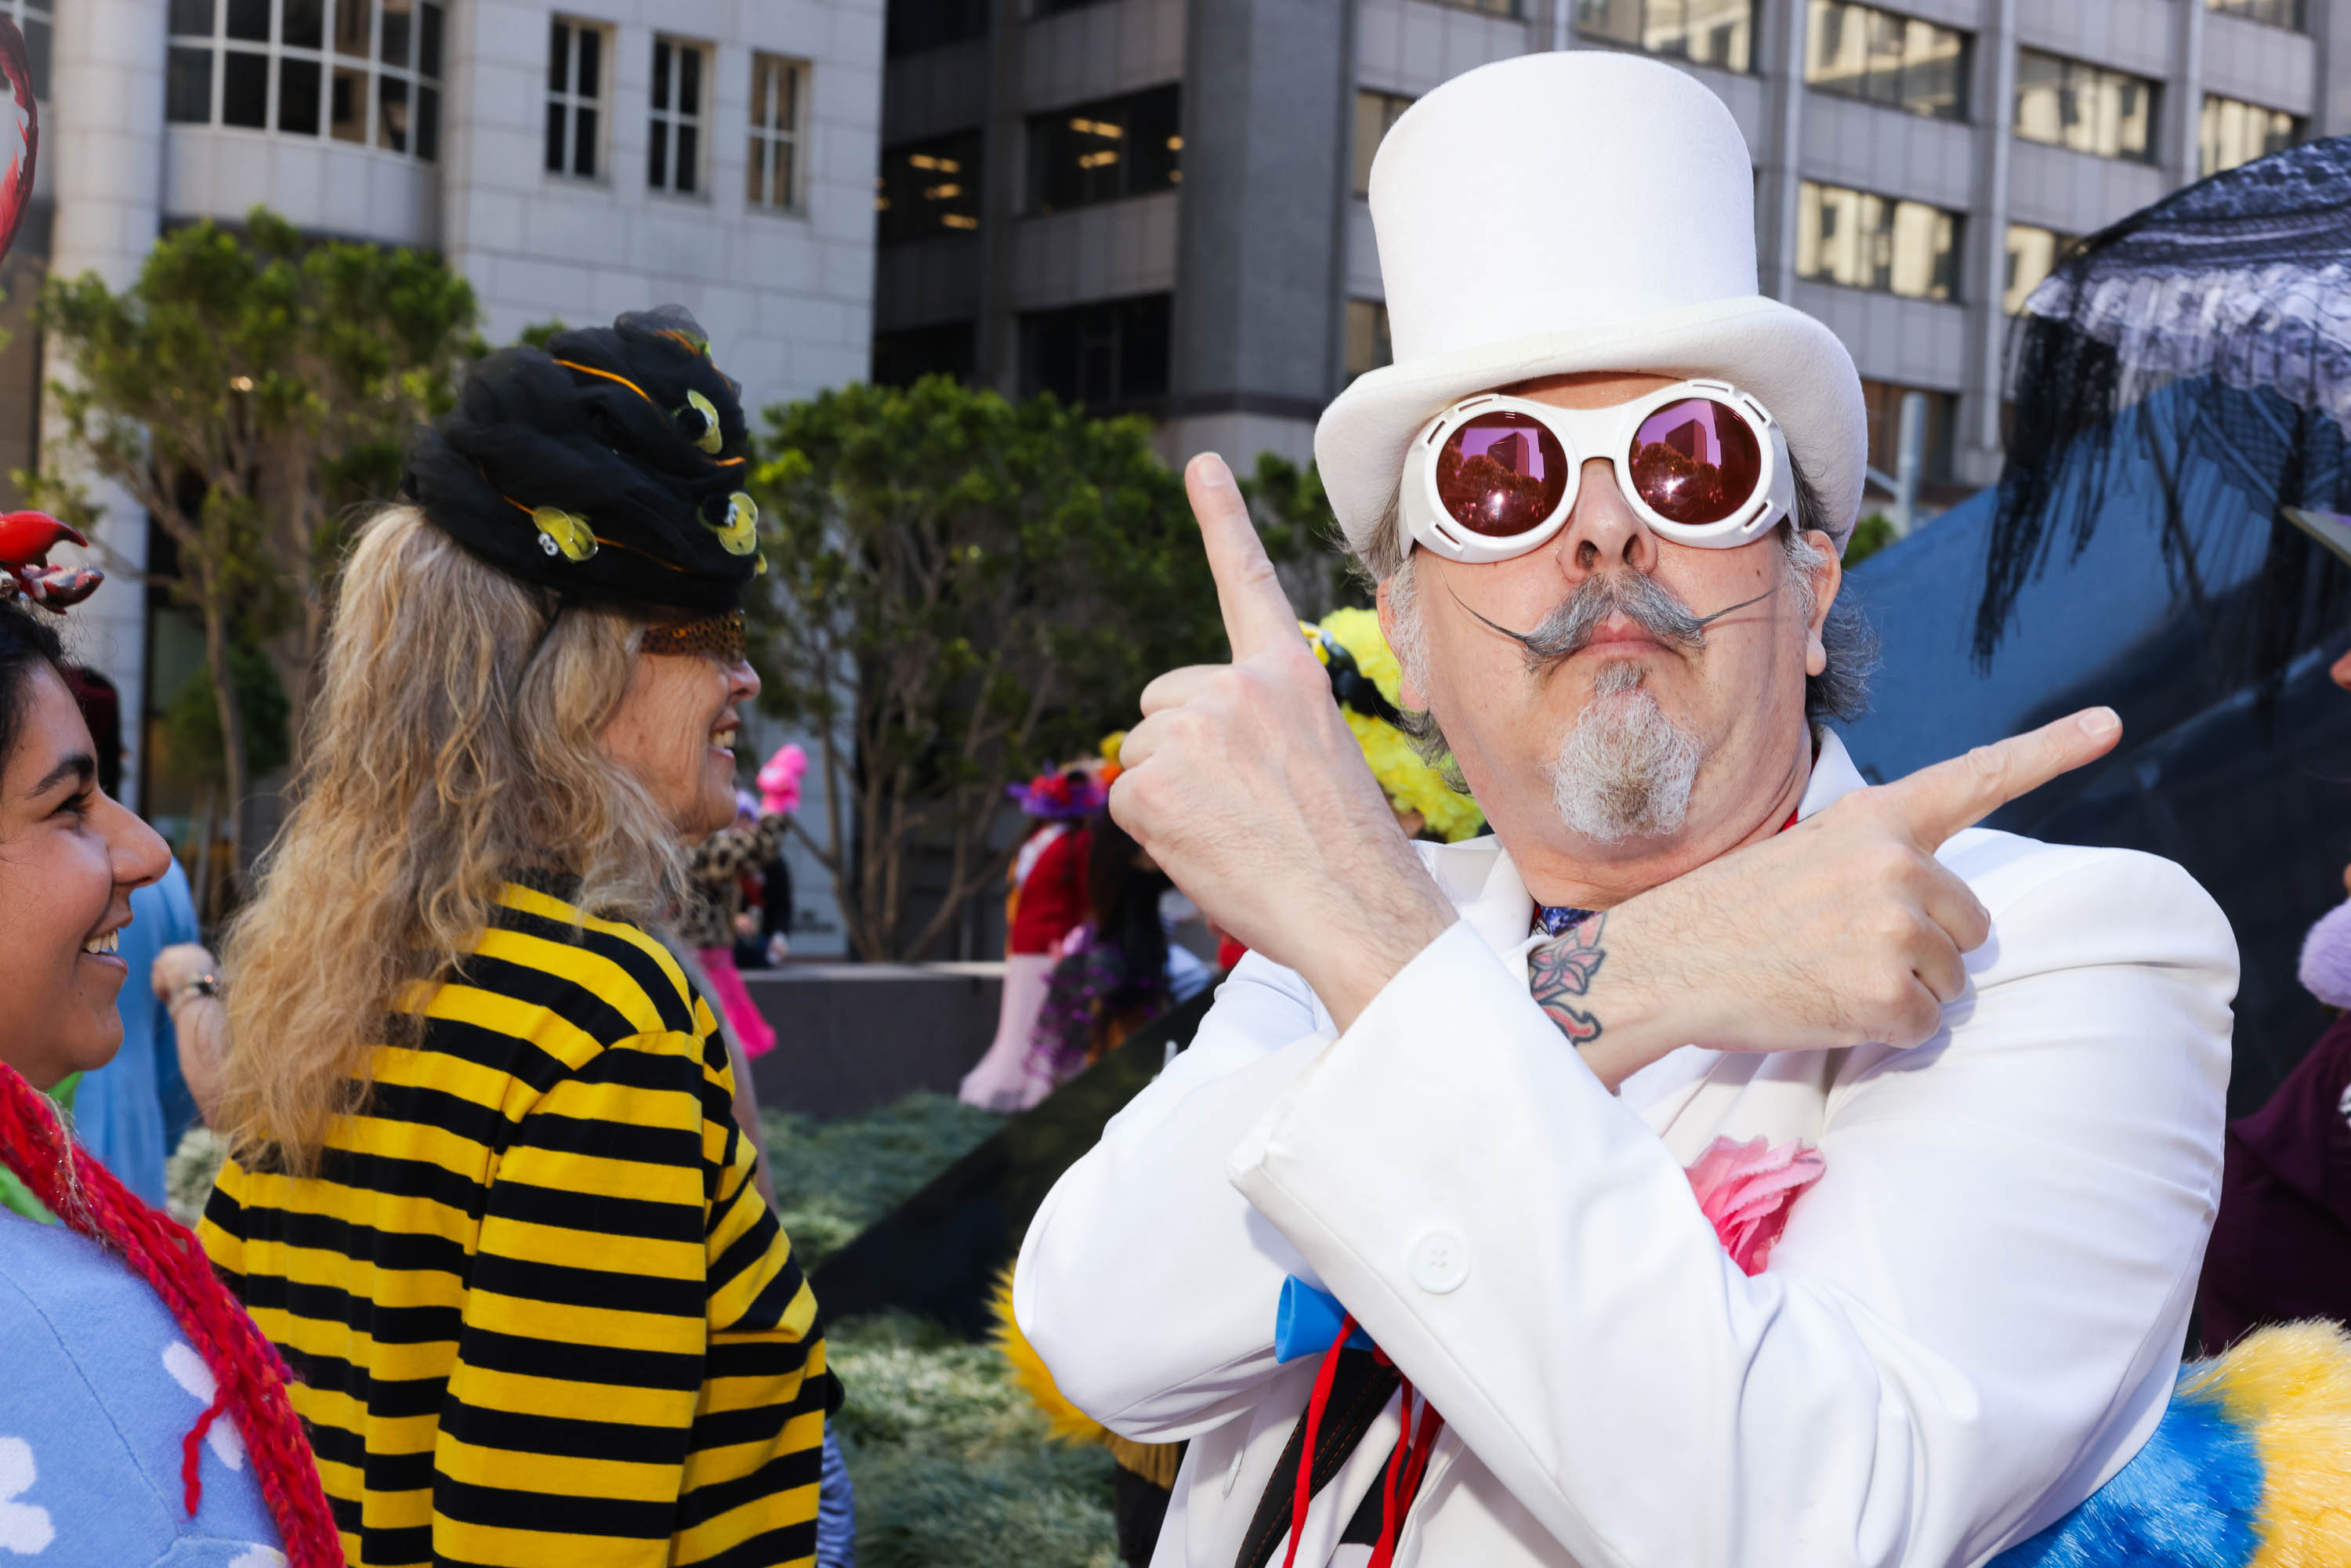 A man in a white top hat and sunglasses strikes a playful pose with two women in colorful, whimsical outfits.